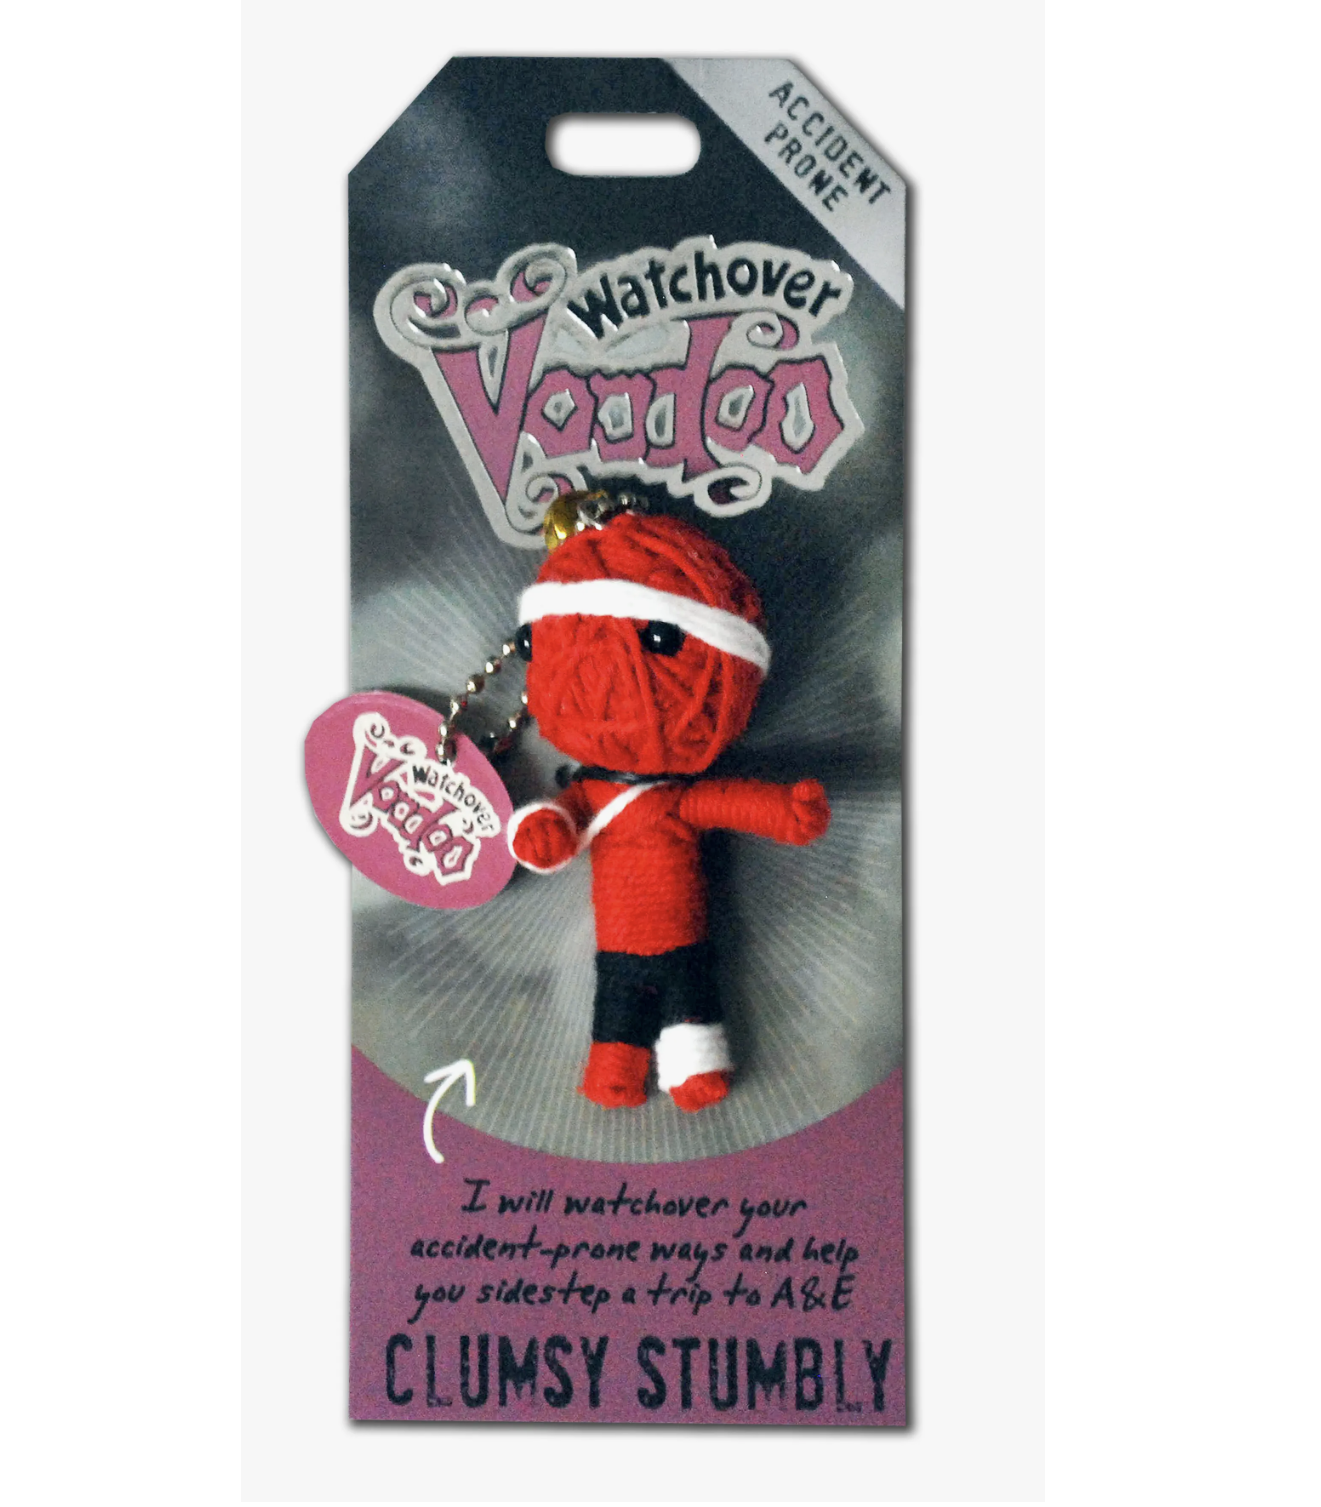 Clumsy Stumbly Voodoo Doll